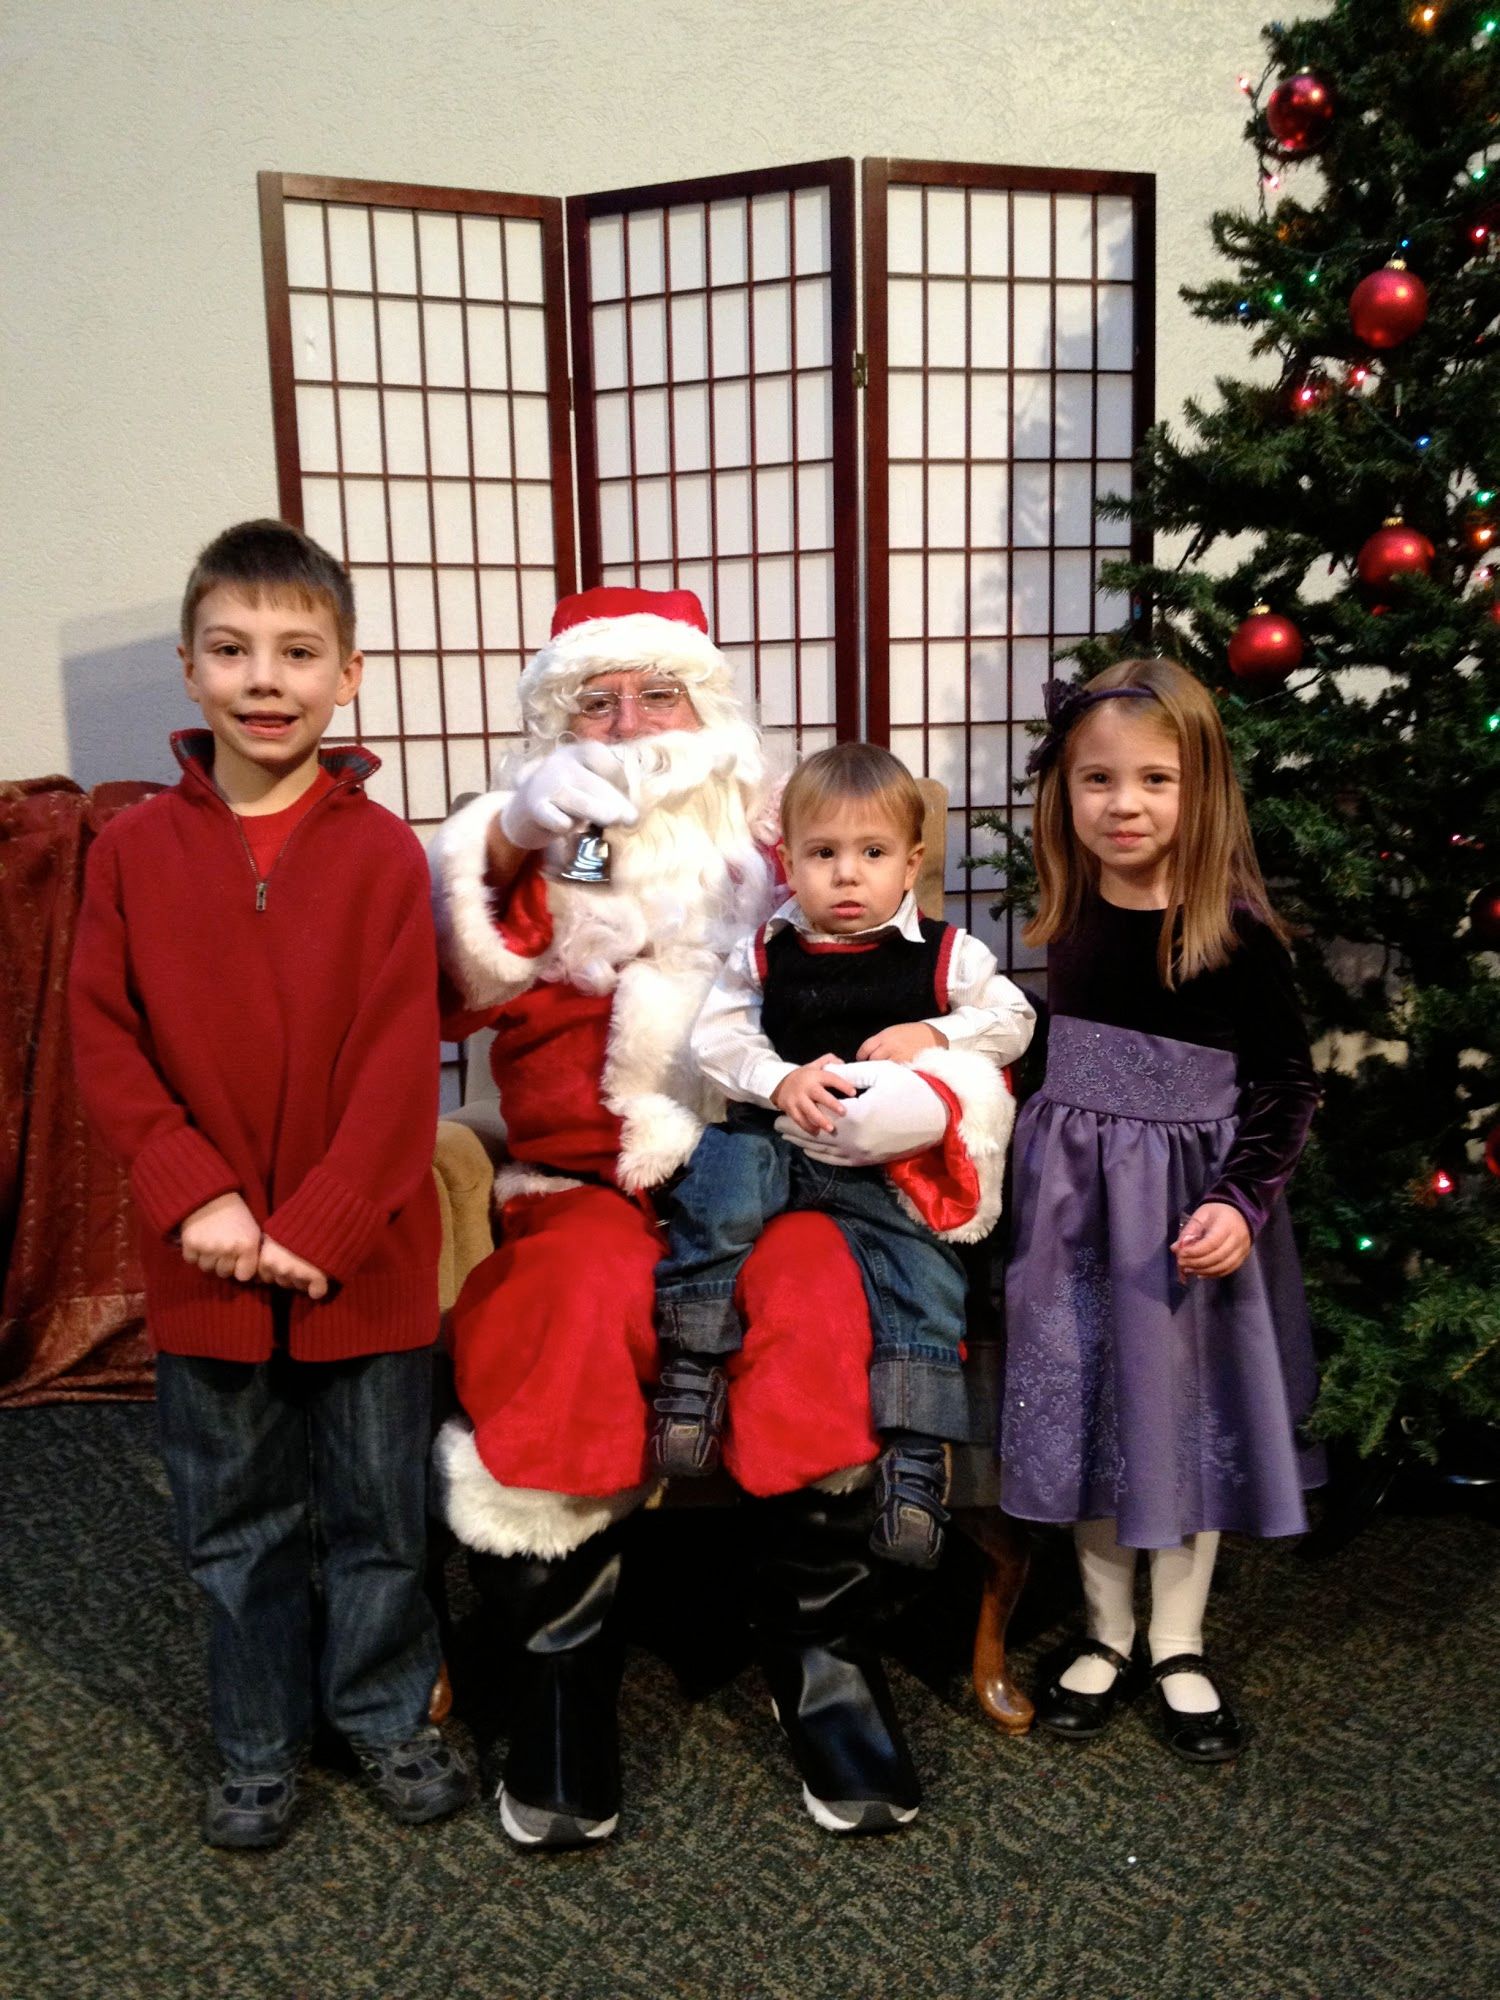  The kids hanging with Santa 